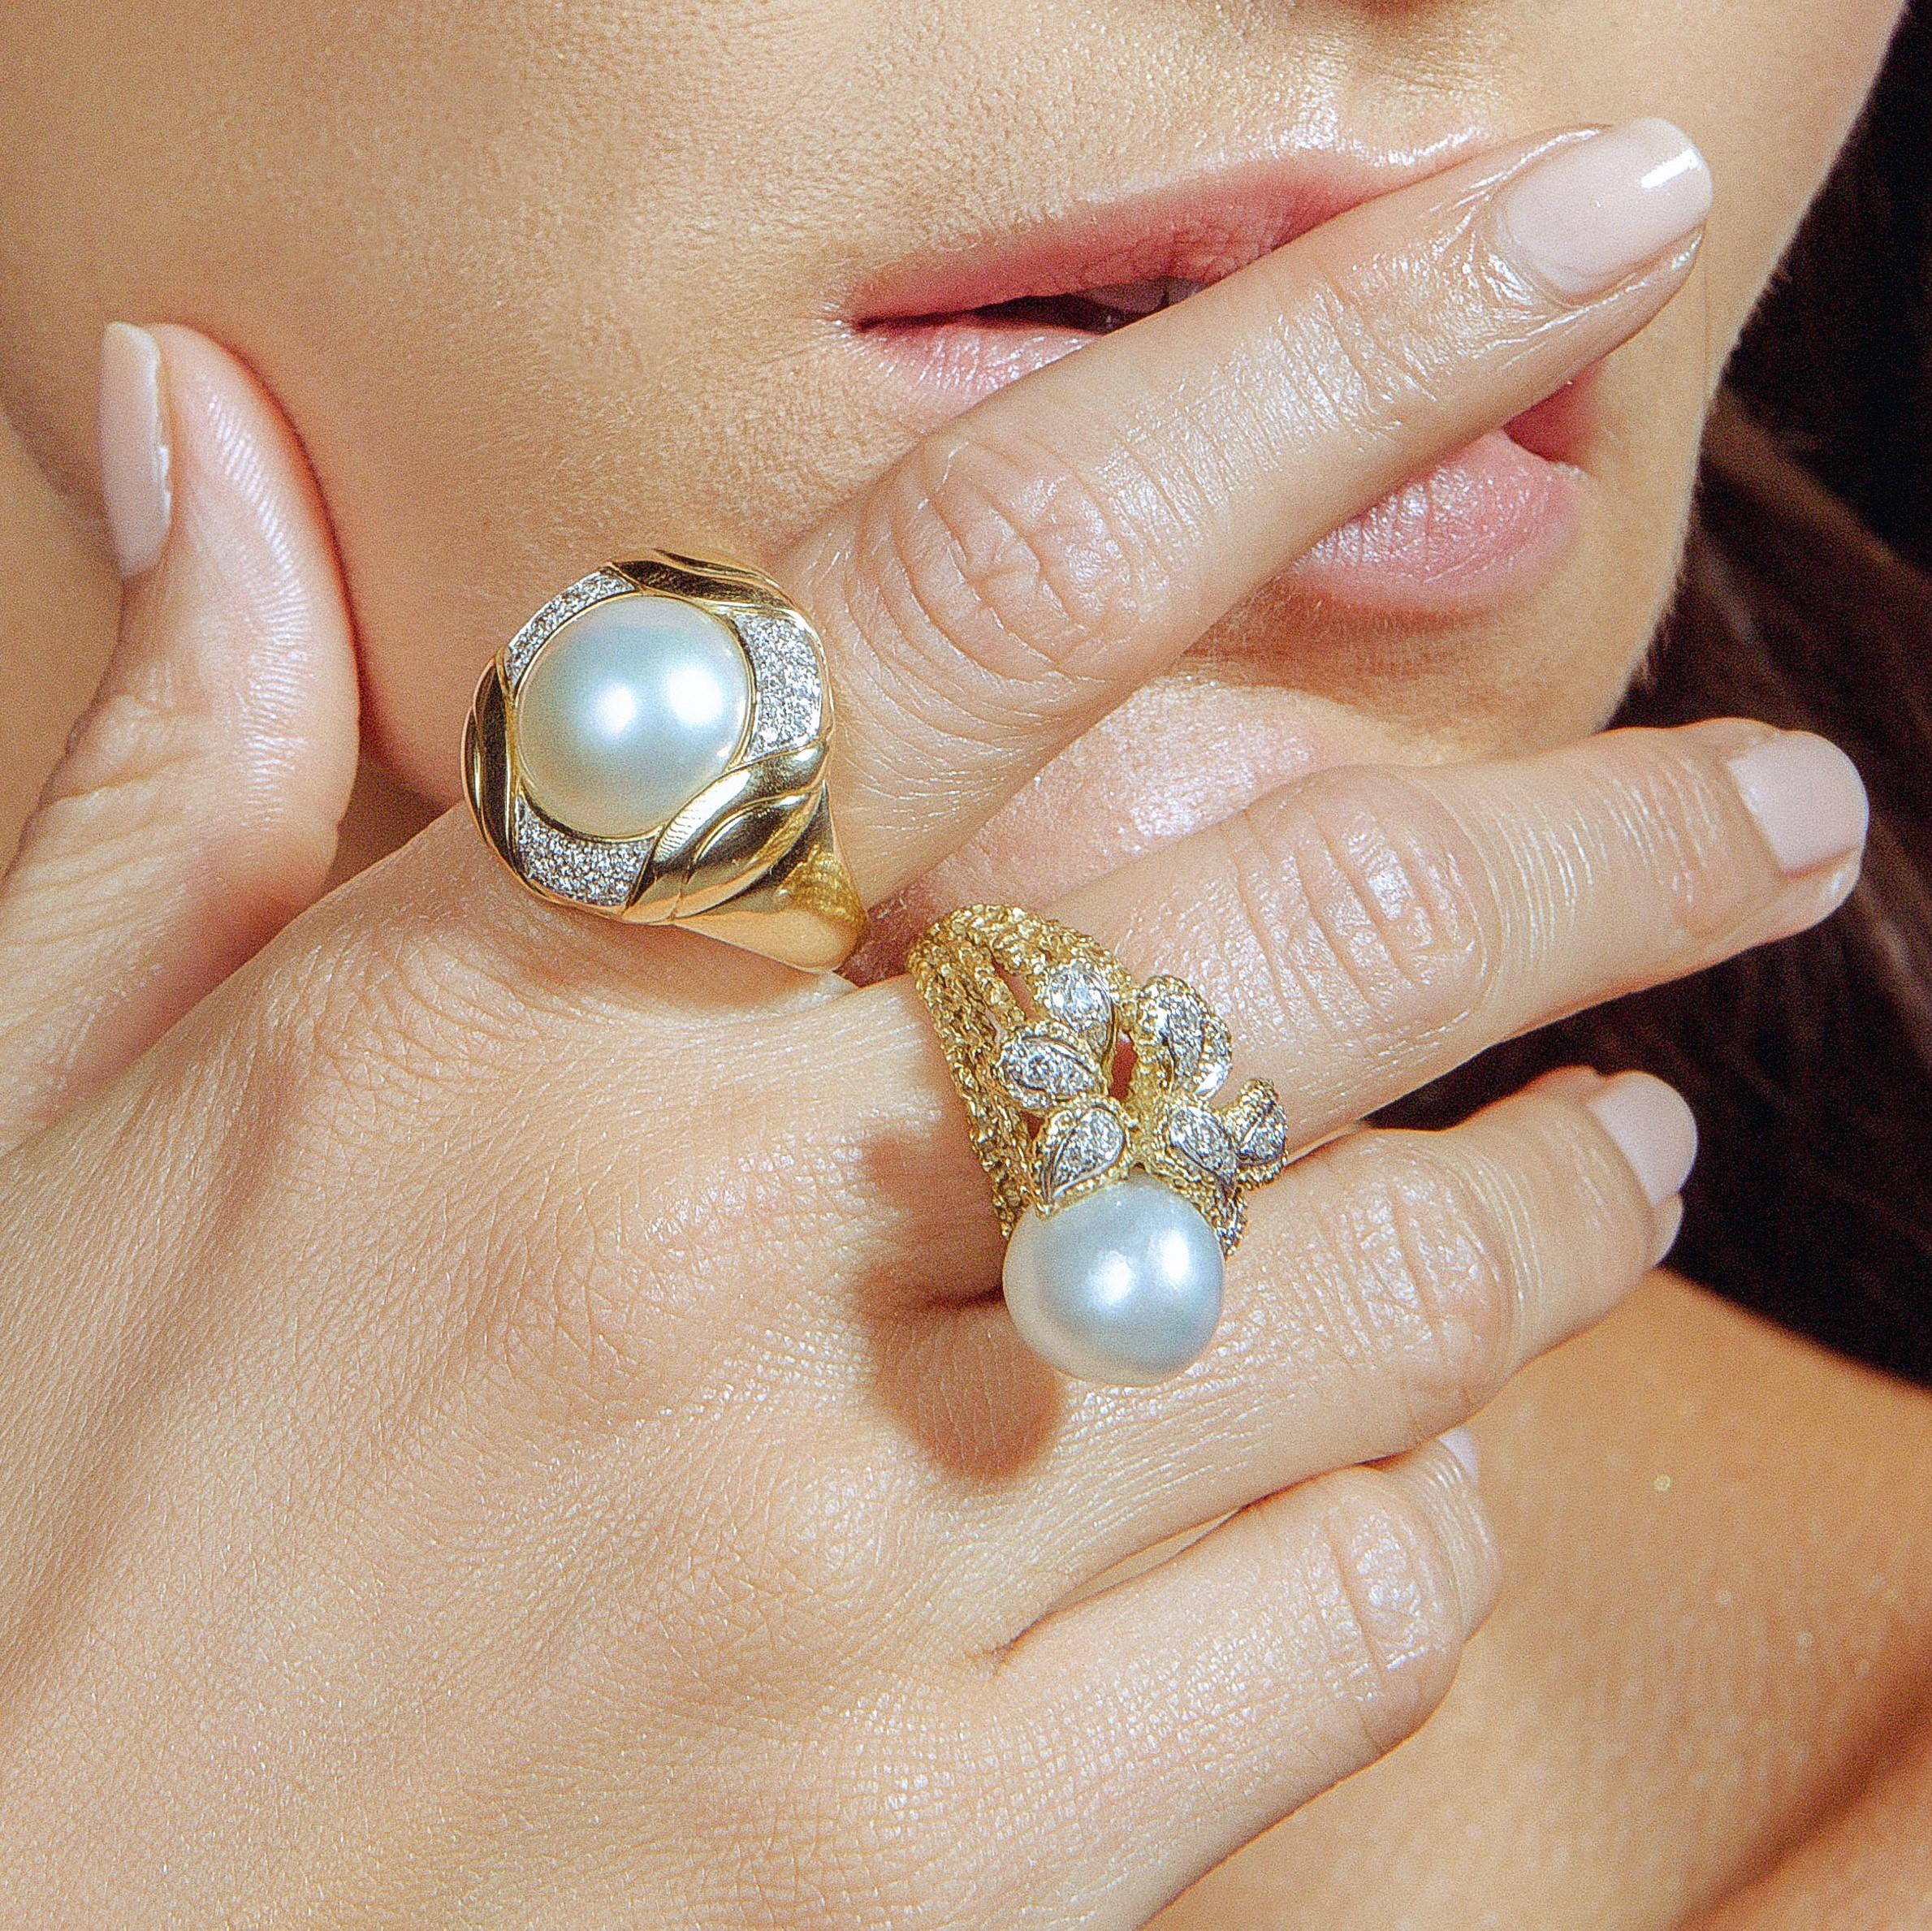 You can almost see yourself shimmer in this ultra-lustrous gold pearl ring! Measuring an eye-catching 15mm and boasting the finest snow-white colour, the round mabe cultured pearl casts a velvety mirror-like glow from atop a chic bomb style